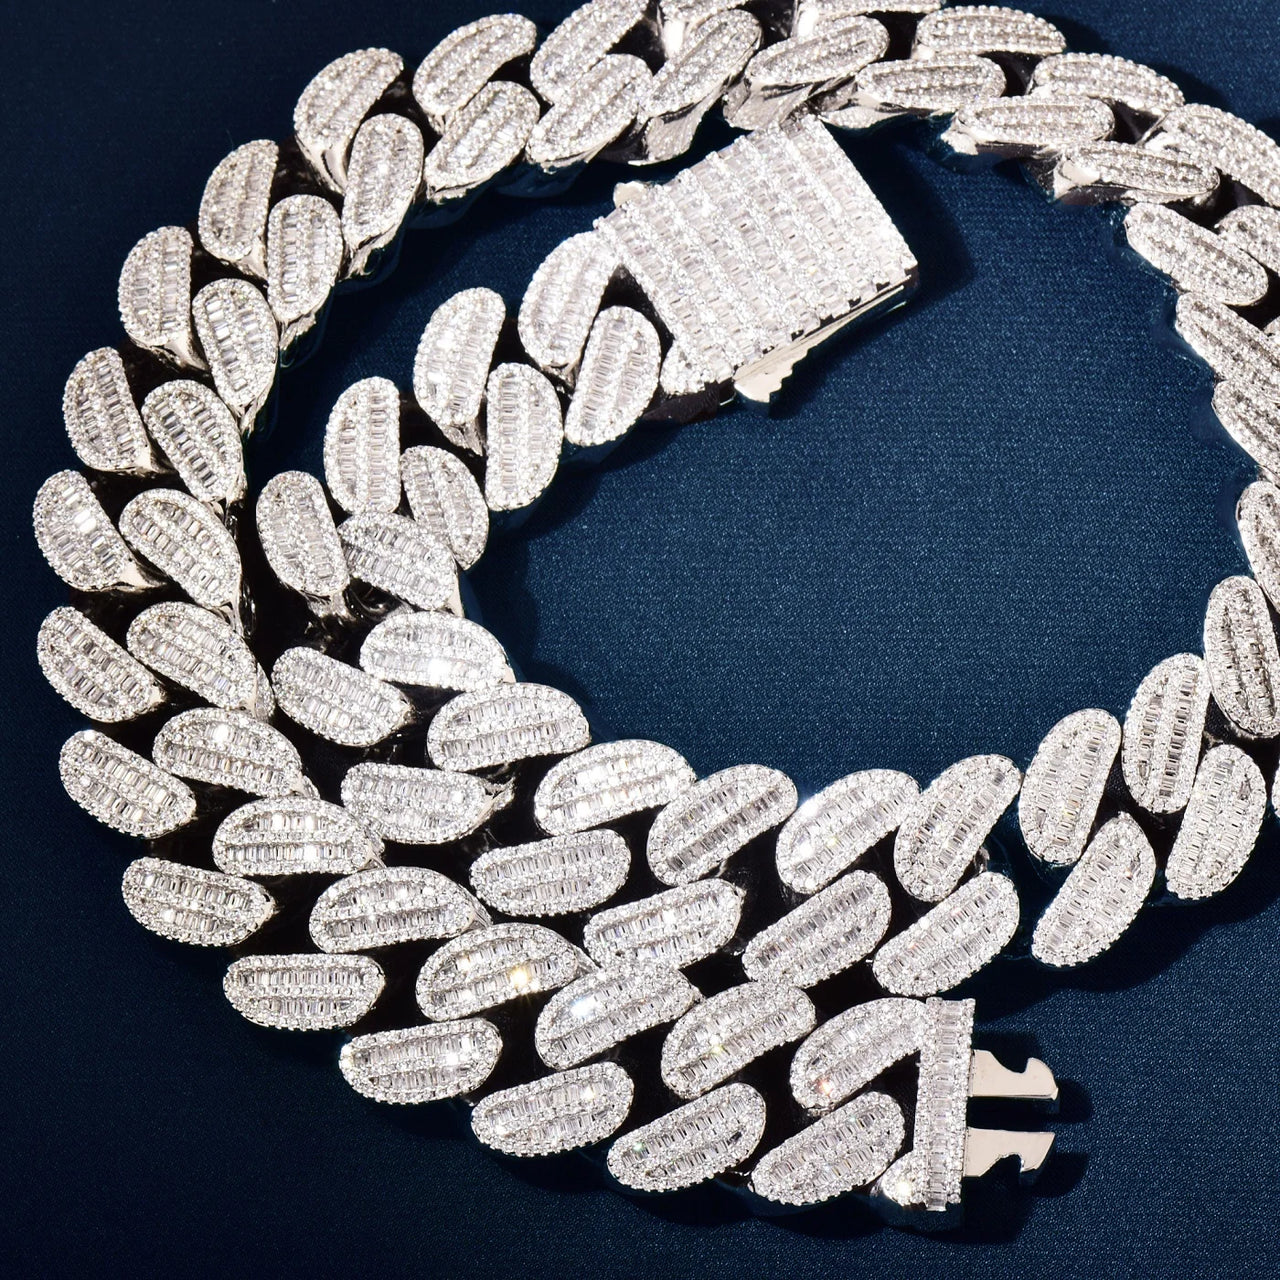 21mm All Over Baguette Cuban Link Chain - Different Drips